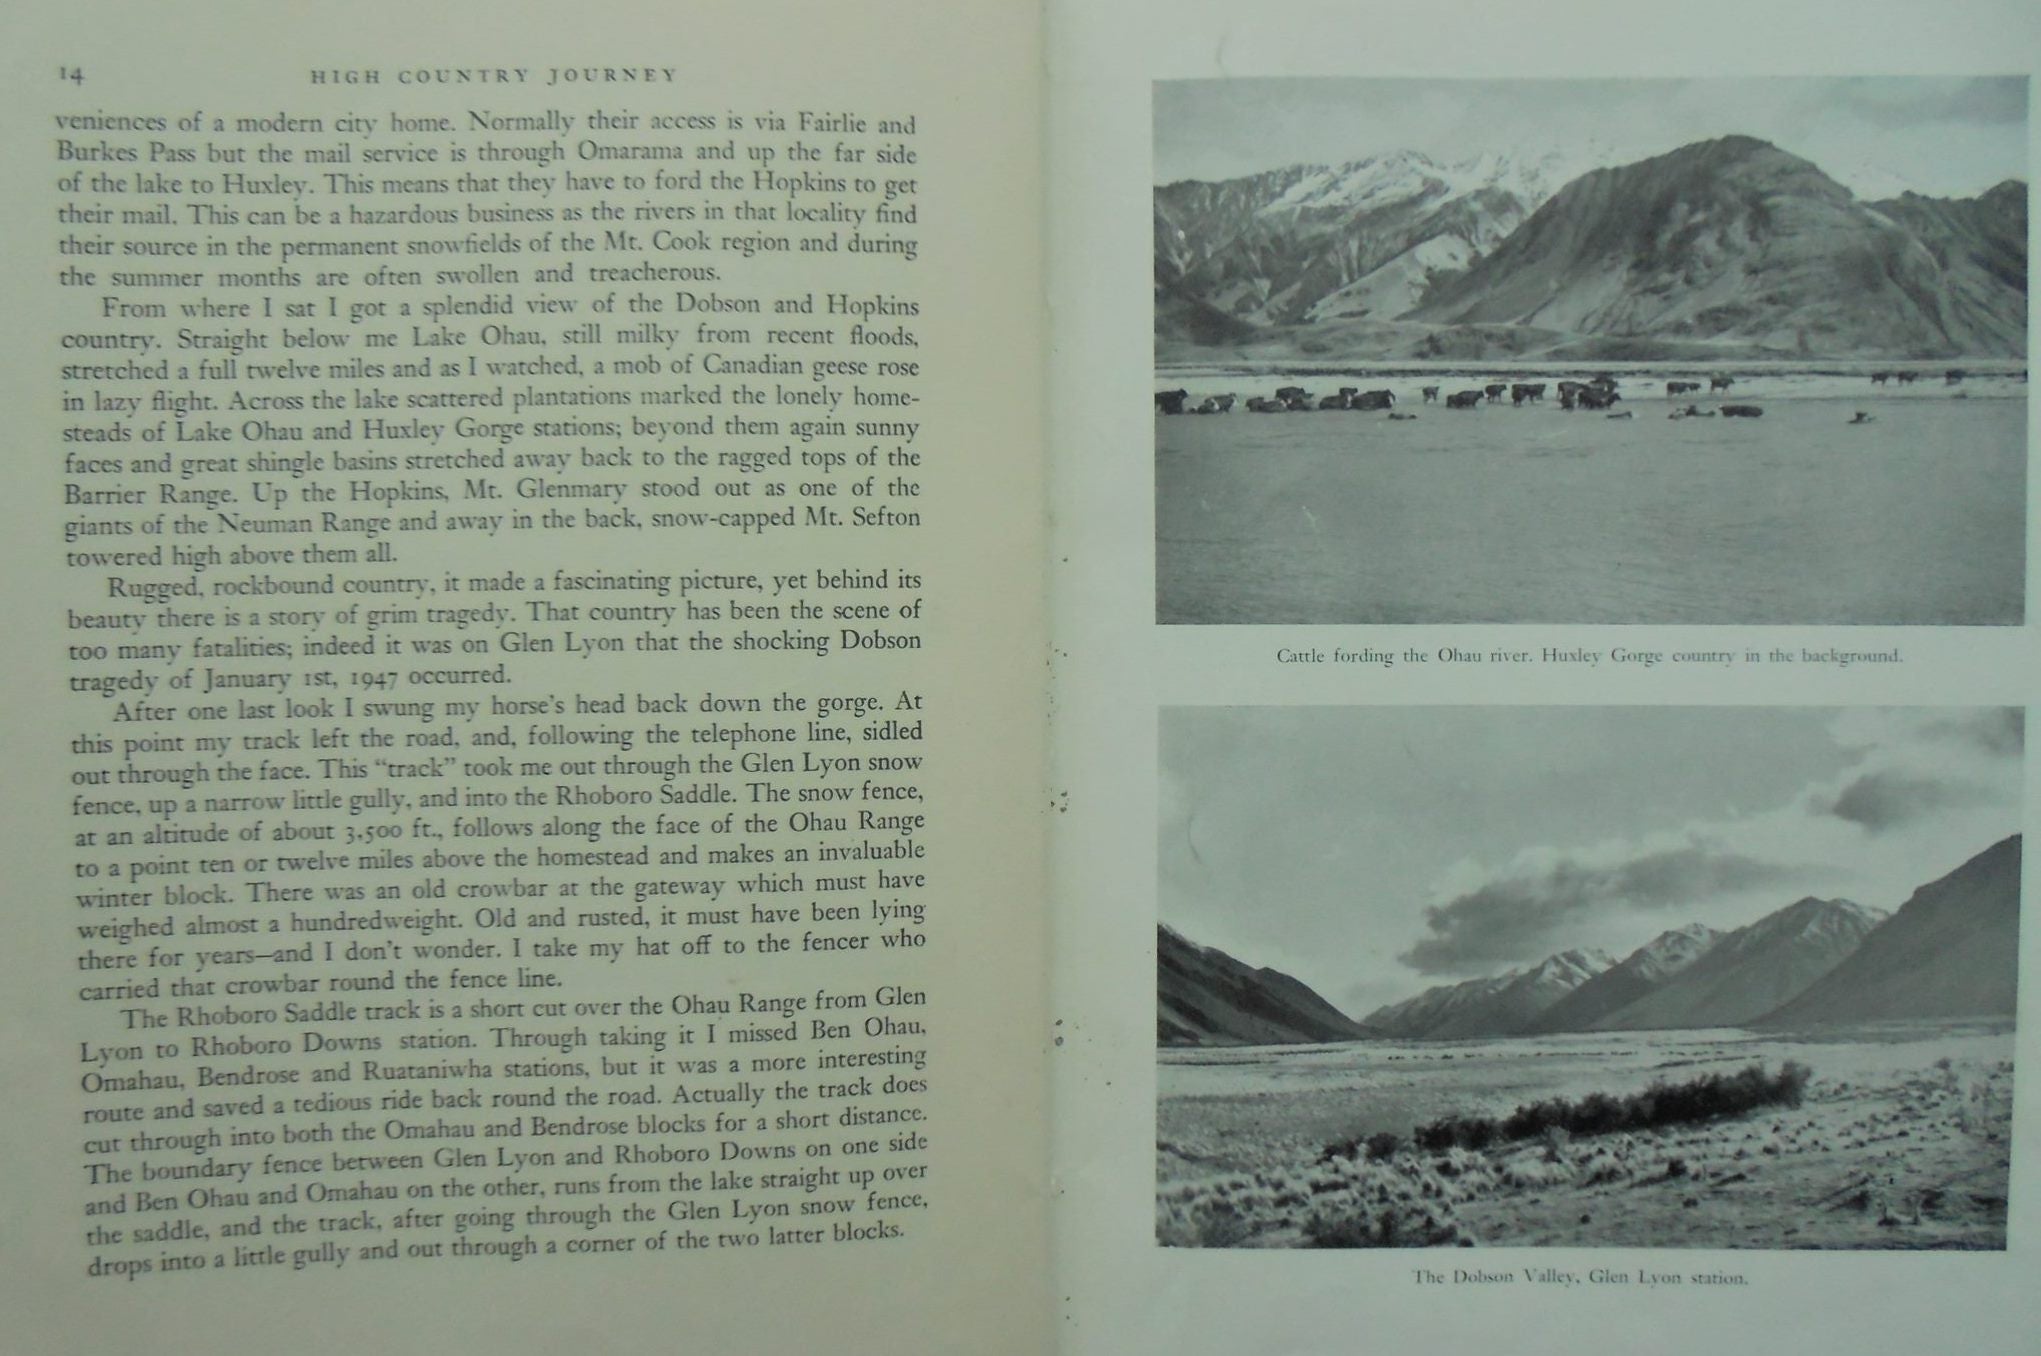 High Country Journey. By Peter Newton - 1st edition